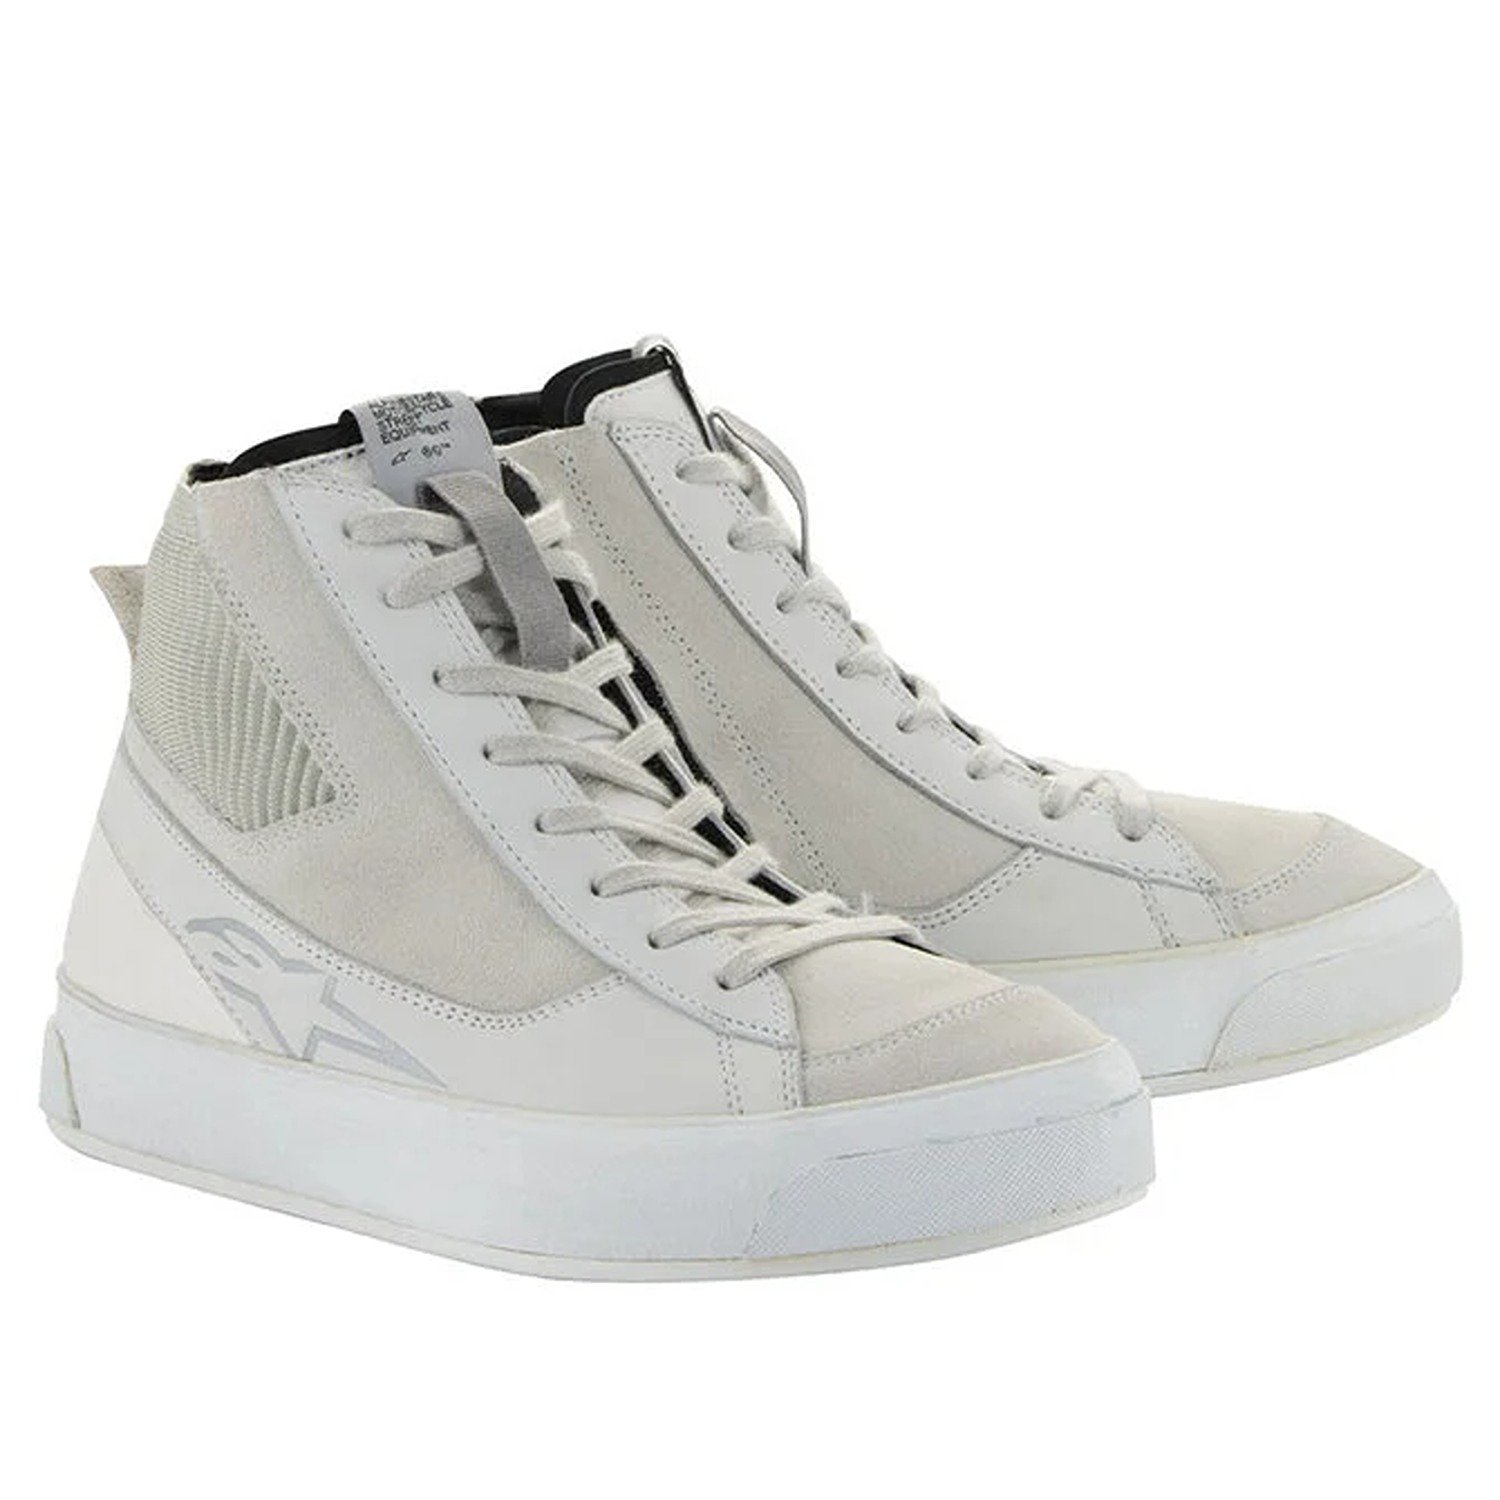 Image of Alpinestars Stated Shoes White Cool Gray Size US 14 EN